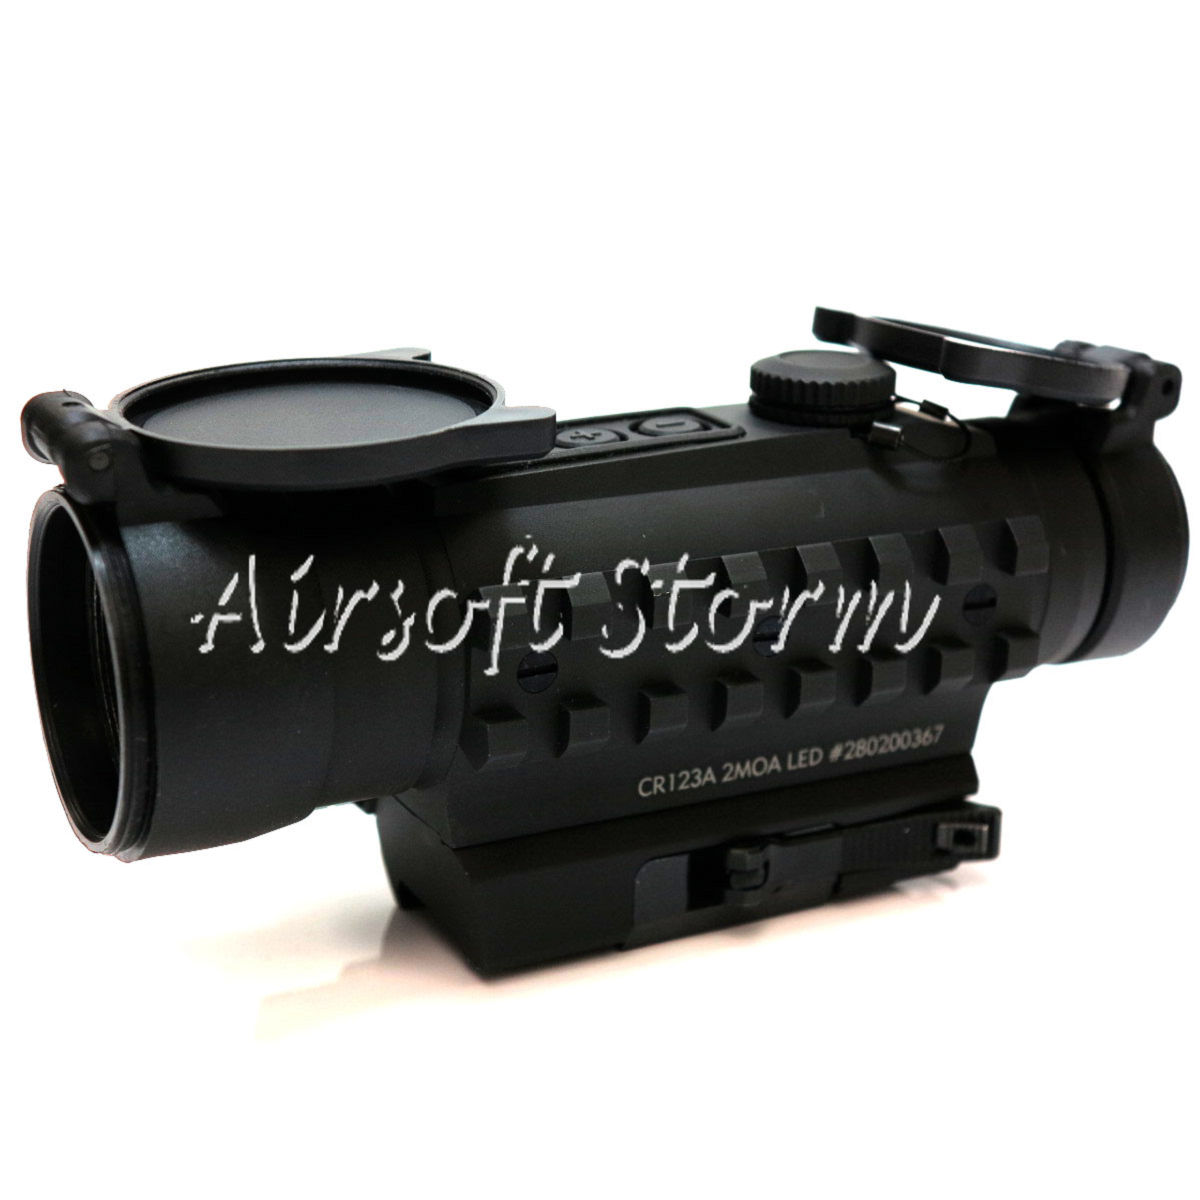 SWAT Gear Tactical Holosun HS400AGA 1x30 Red Dot Sight Scope with Green Laser (2 MOA)